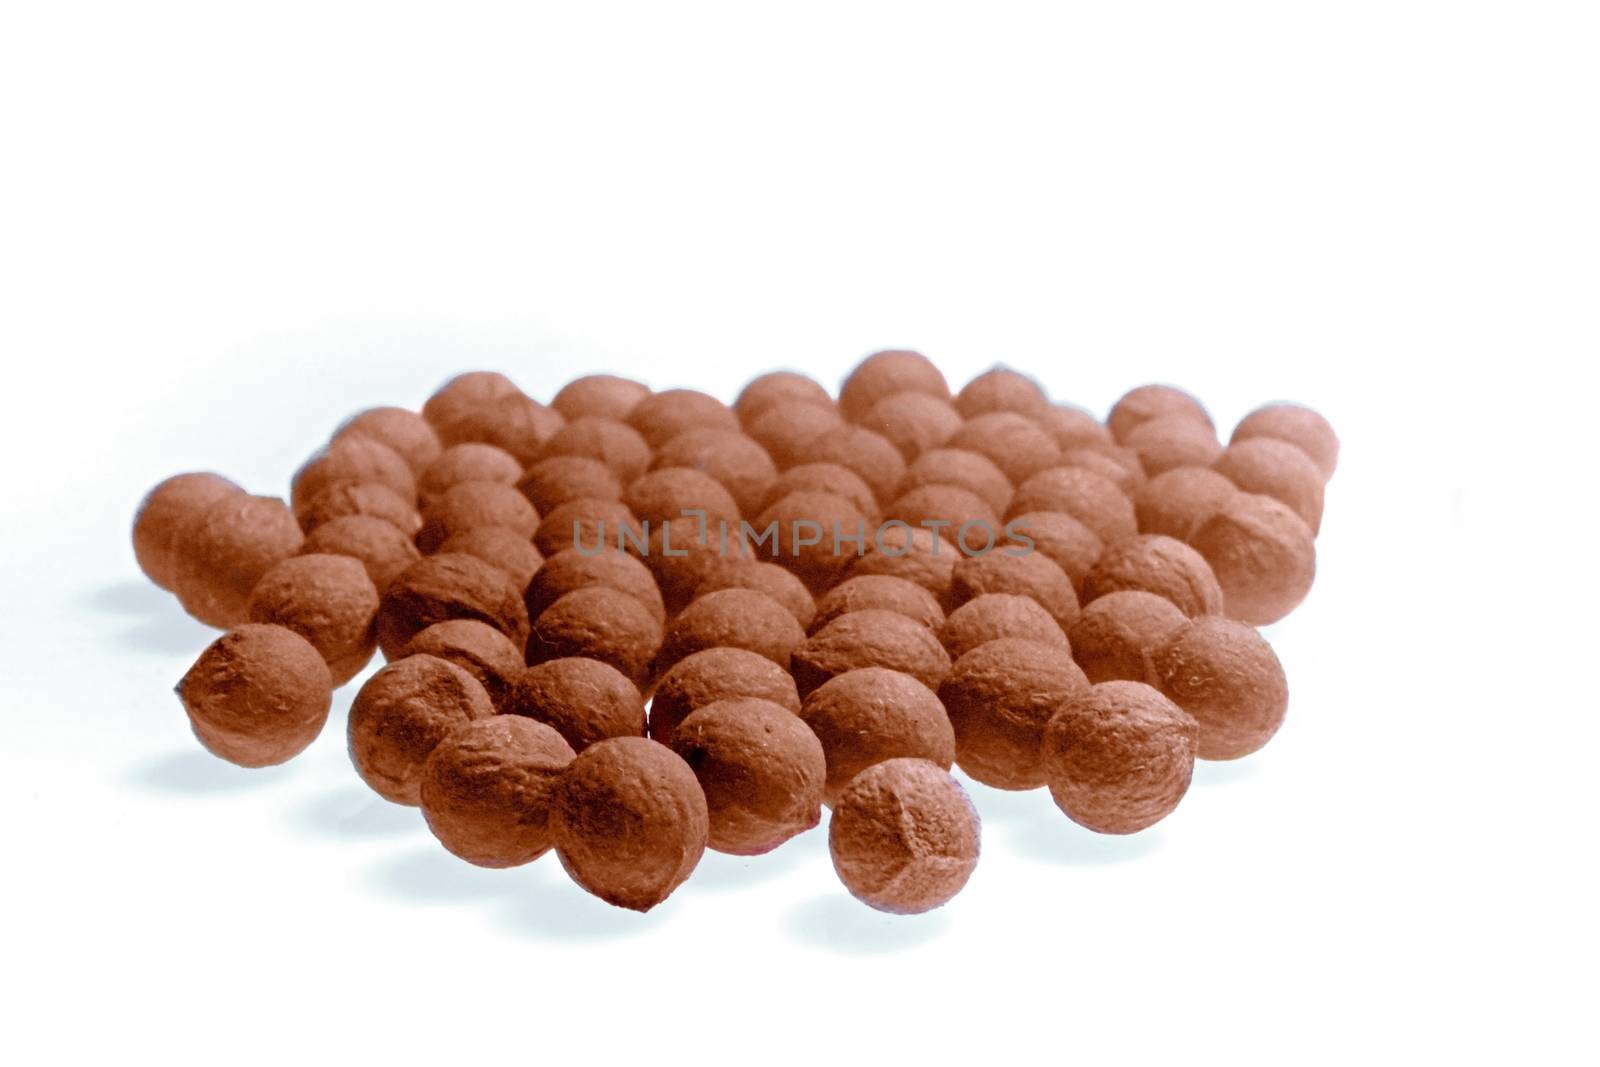 Seeds of sandalwood tree. Santalum spicatum, Australian sandalwood is a tree traded as sandalwood, and its valuable oil has been used as an aromatic, a medicine, and a food source. S. spicatum is one of four high-value Santalum species.